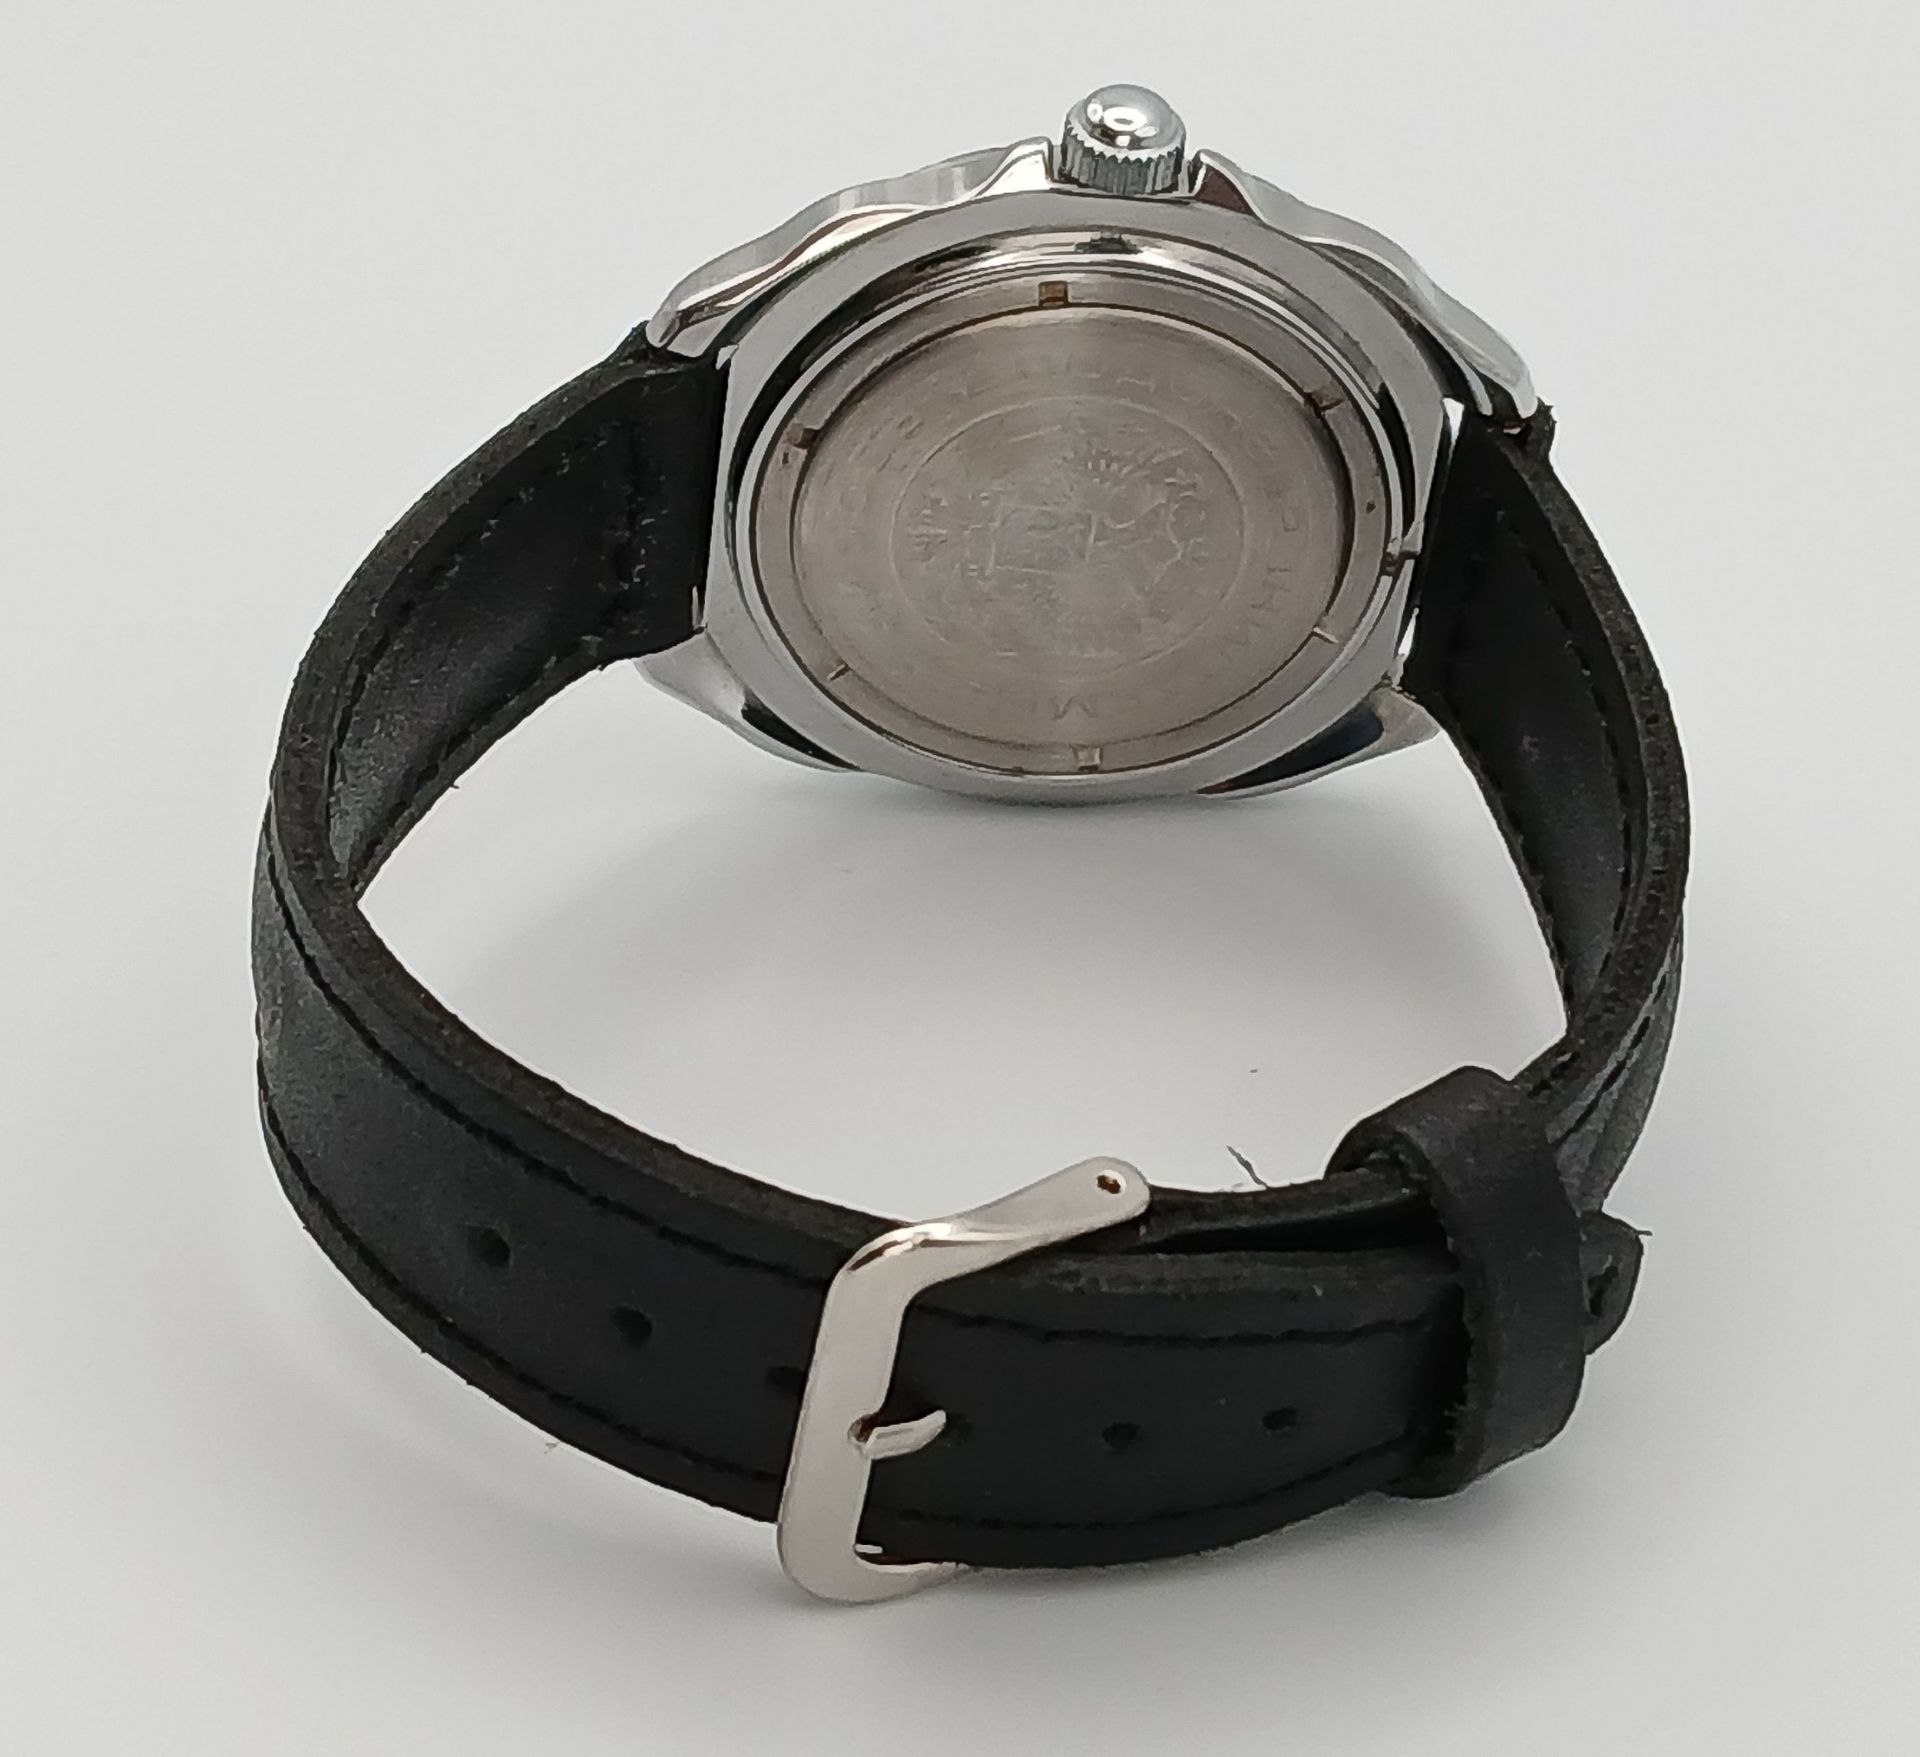 A Vostok Automatic Gents Watch. Black leather strap. Stainless steel case - 40mm. White dial with - Image 3 of 7